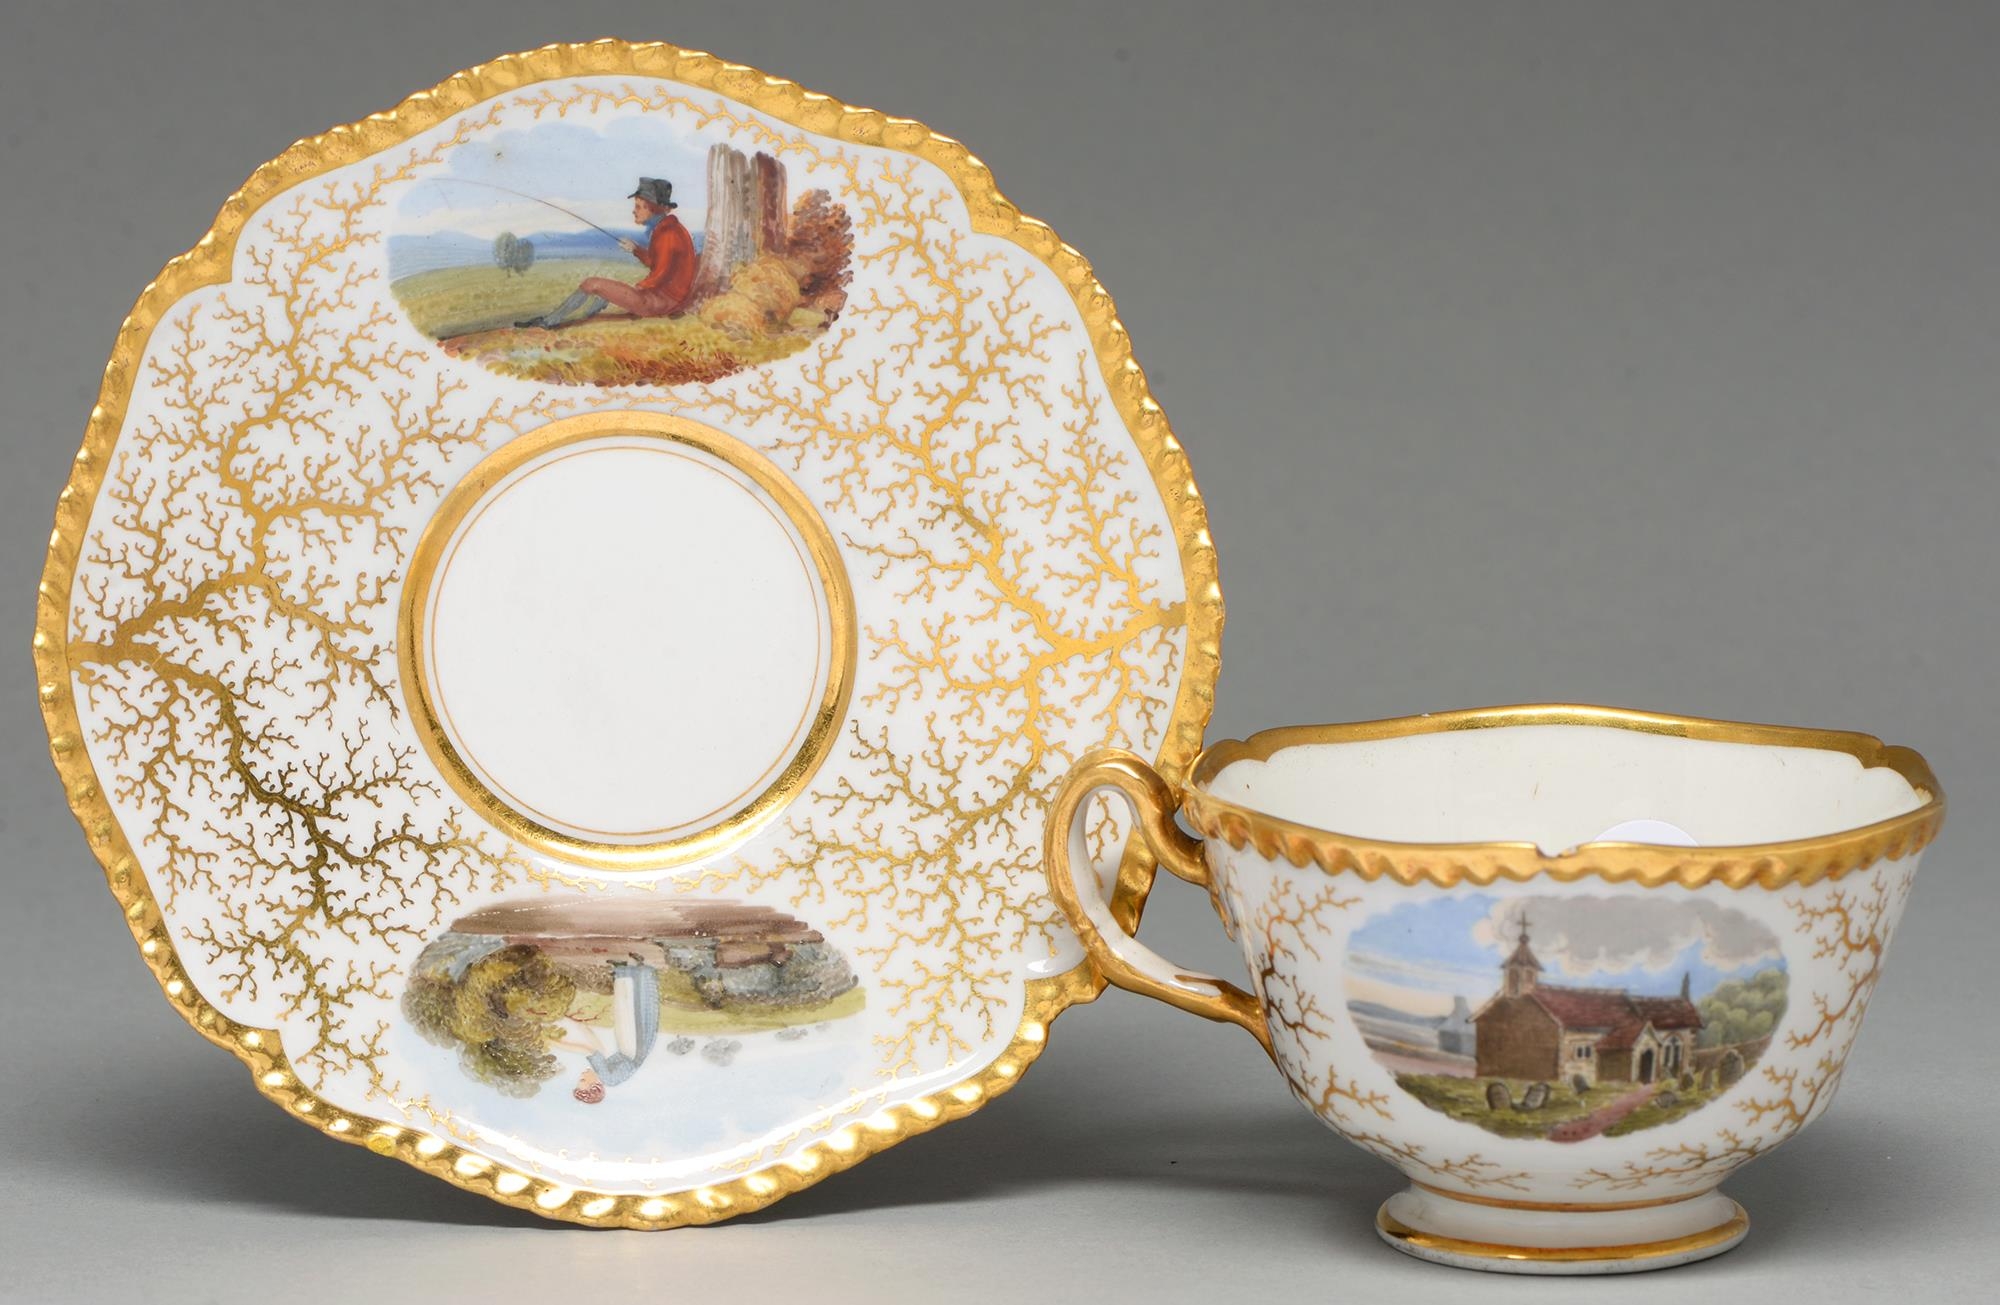 A Flight, Barr & Barr teacup and saucer, c1825, painted with vignettes, including an angler, on a